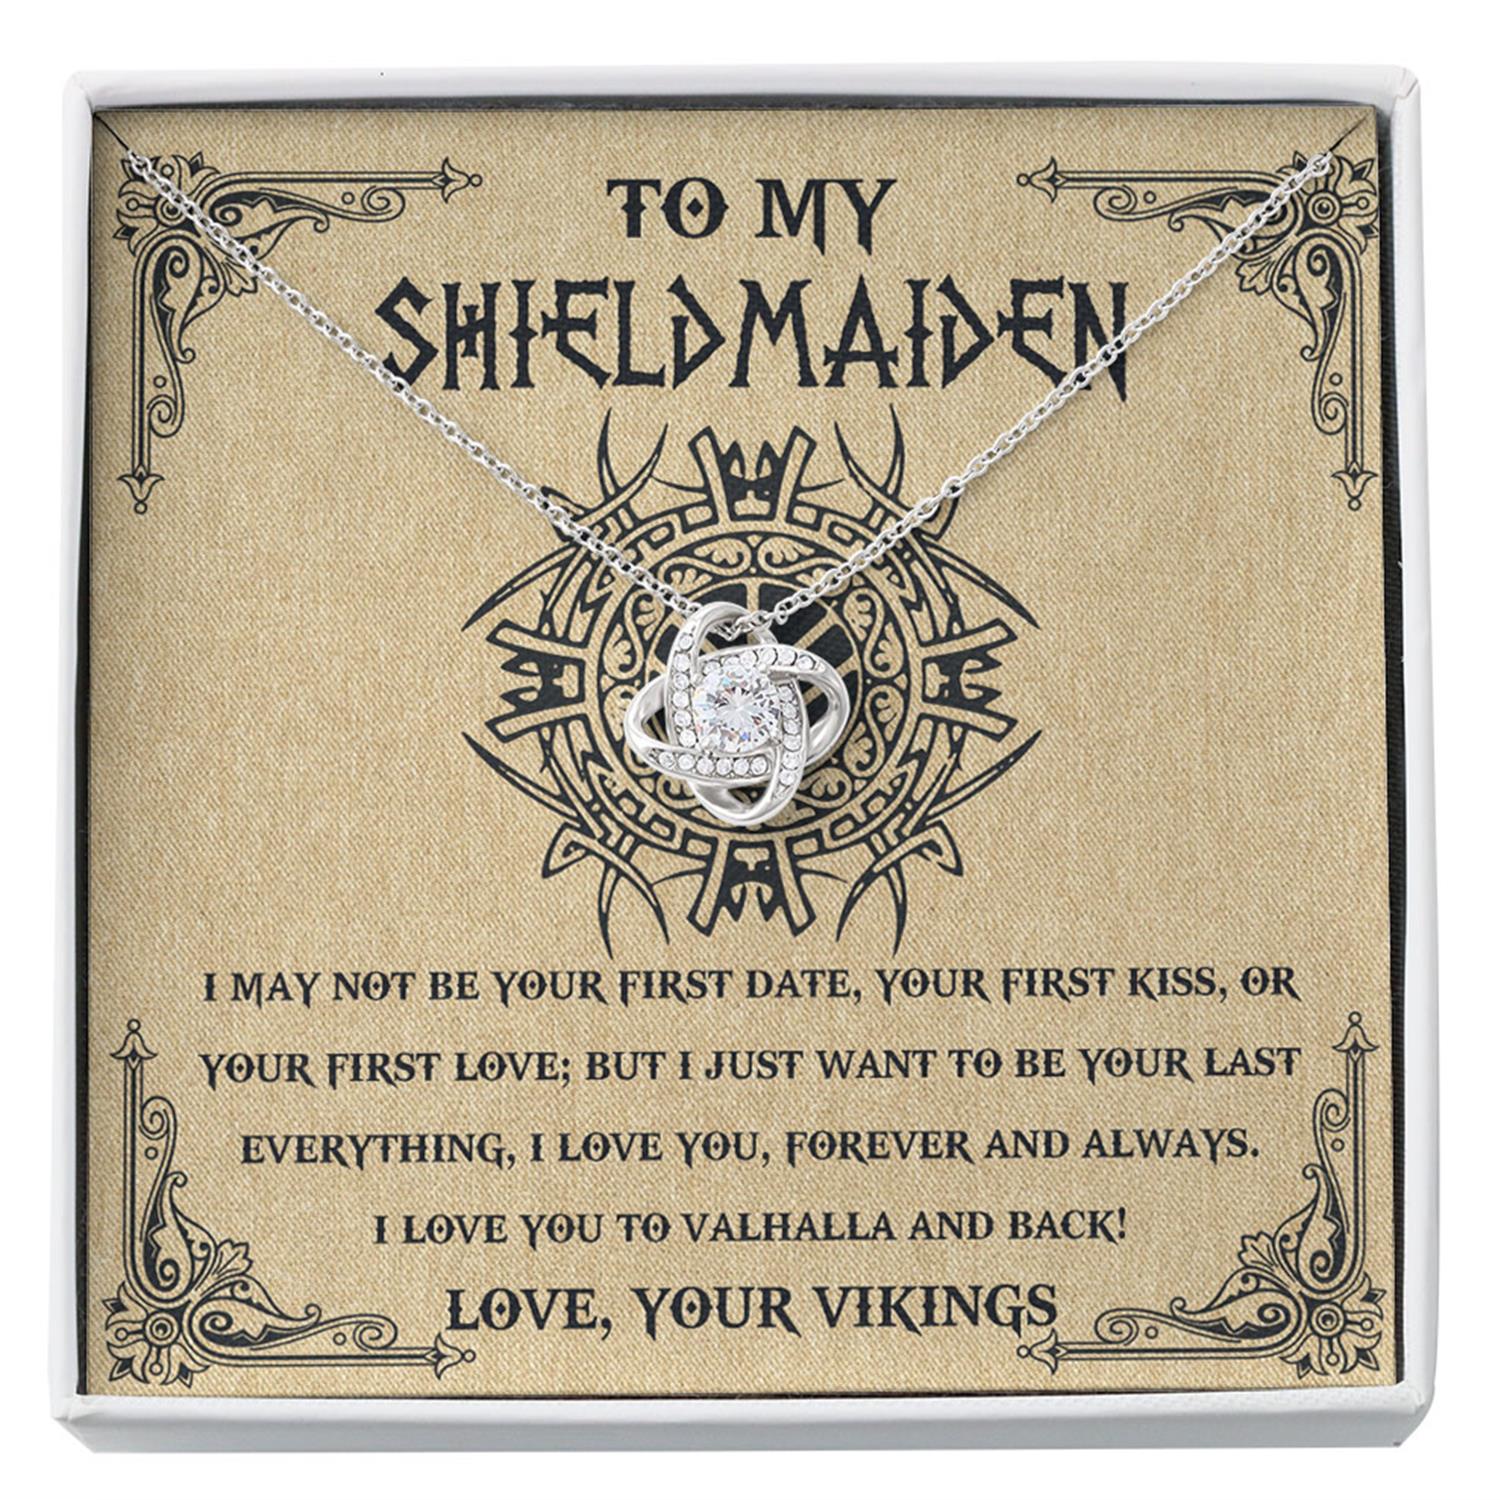 Girlfriend Necklace, Future Wife Necklace, Wife Necklace, To My Shieldmaiden Necklace Gift - Love You To Valhalla And Back Vikings Style Wife Future Wife Girlfrend Custom Necklace